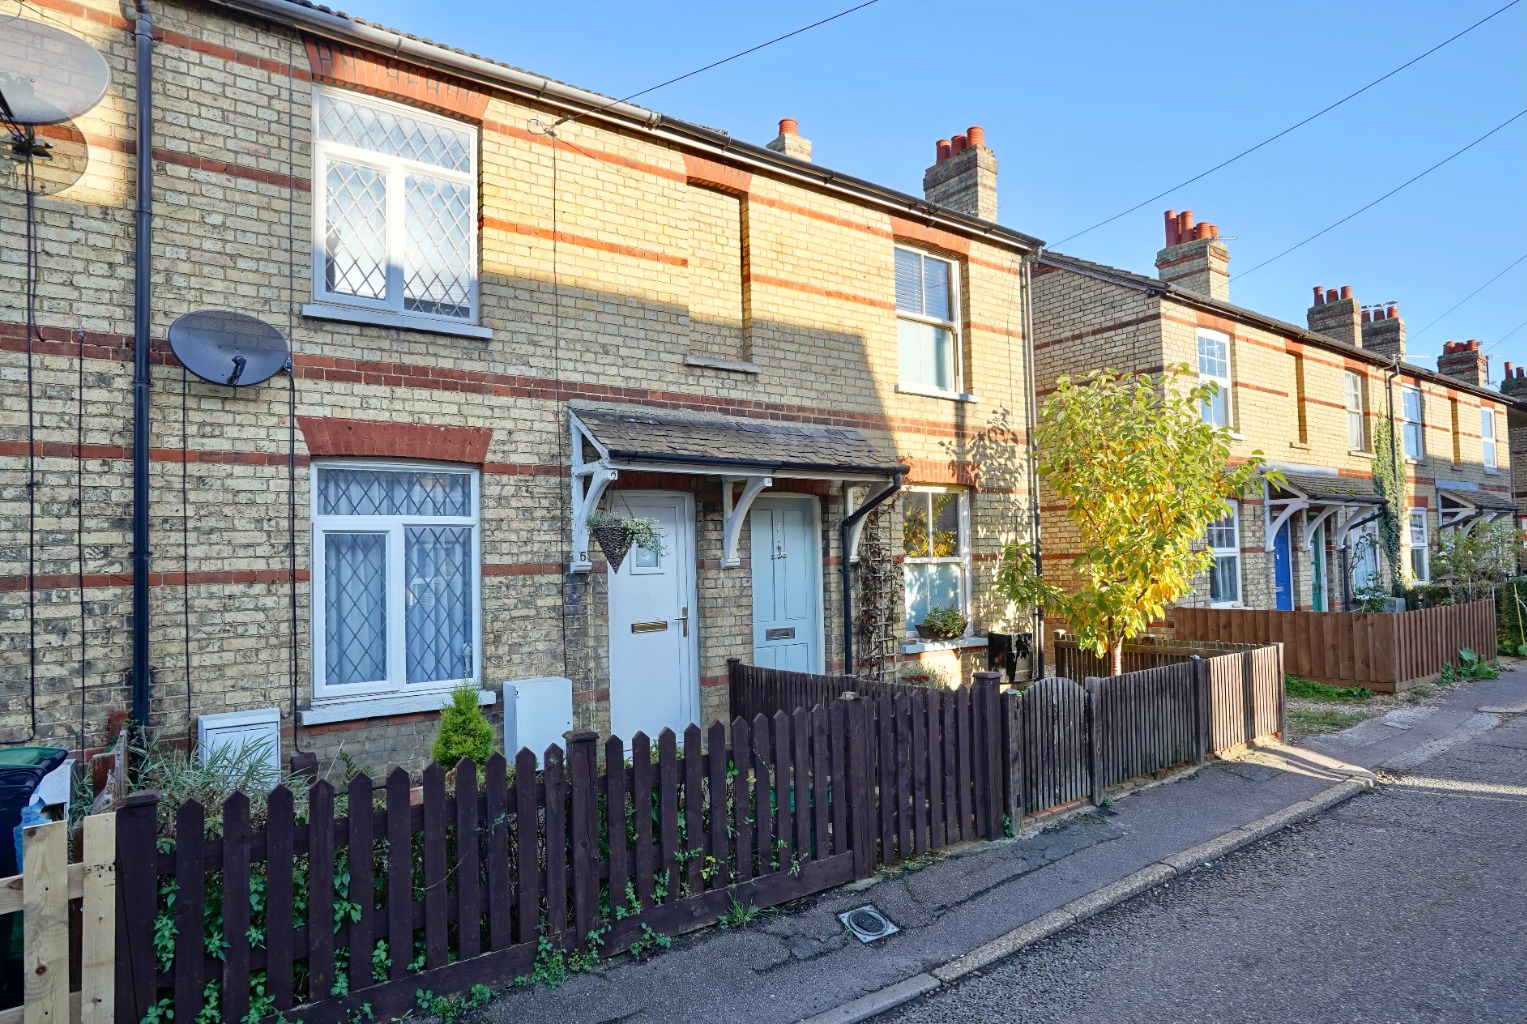 This well presented two bedroom Victorian terrace is a must see with two double bedrooms, lounge with open fire, separate dining room, good size rear garden and all within walking distance to the town centre. This home is an ideal investment/first time buy.